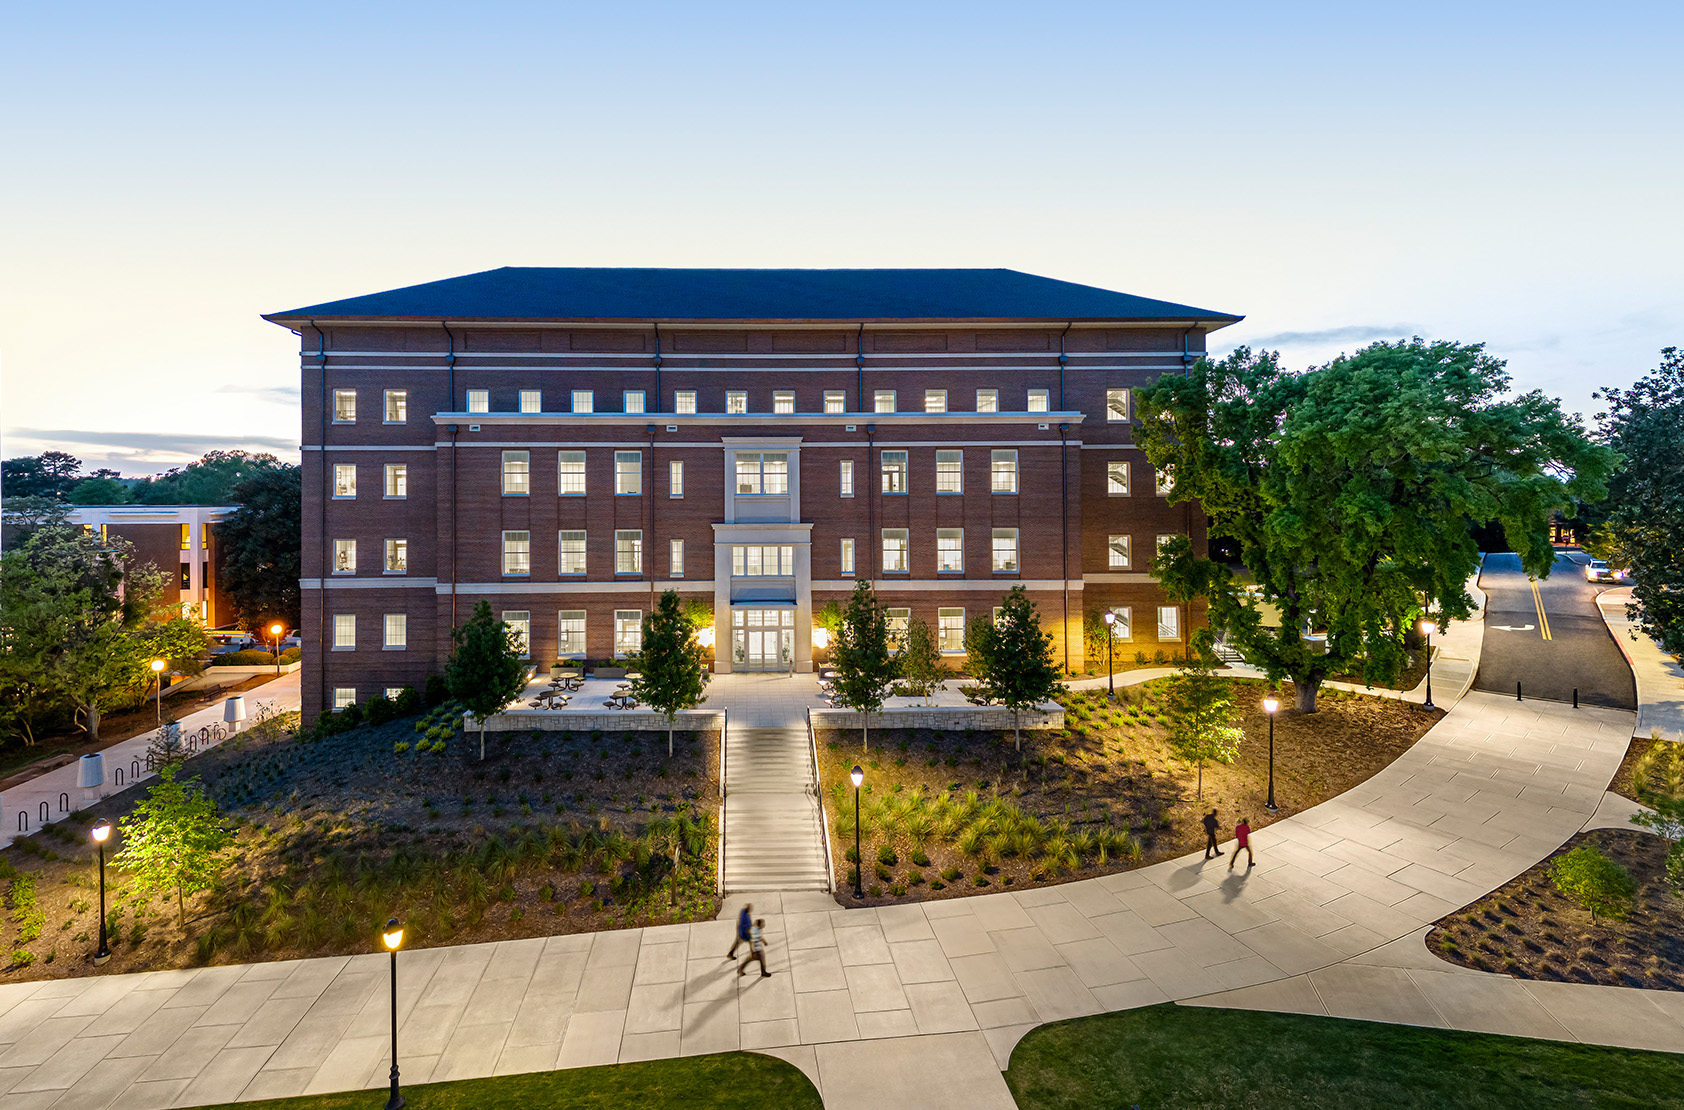 University of Georgia - Poultry Science Complex: Drone captured overall building exterior at dusk captured straight on showing entry and landscape with curved pedestrian path in foreground with people walking